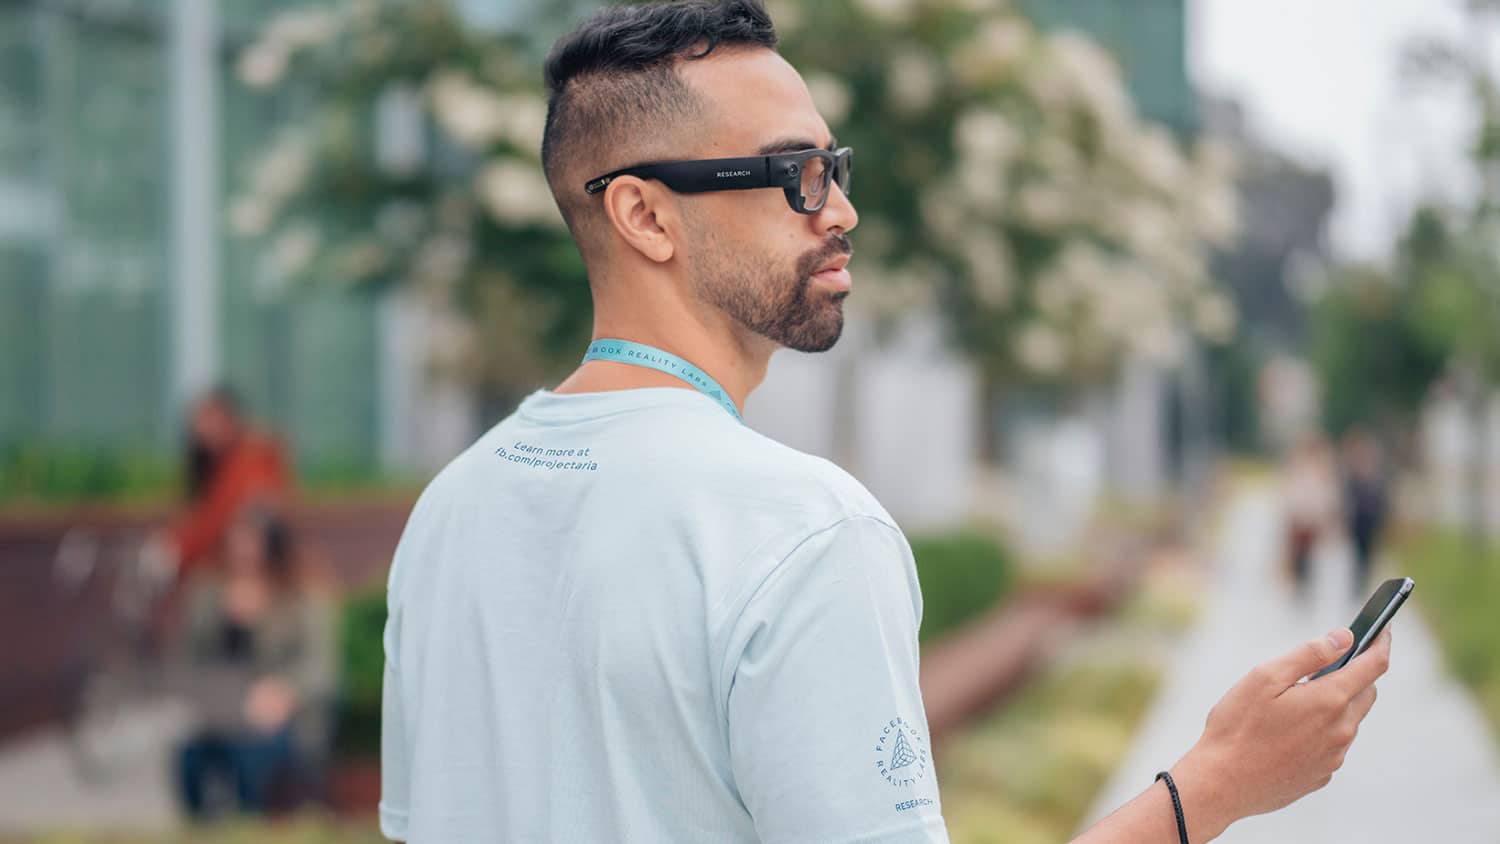 Facebook is building Augmented Reality (AR) glasses.